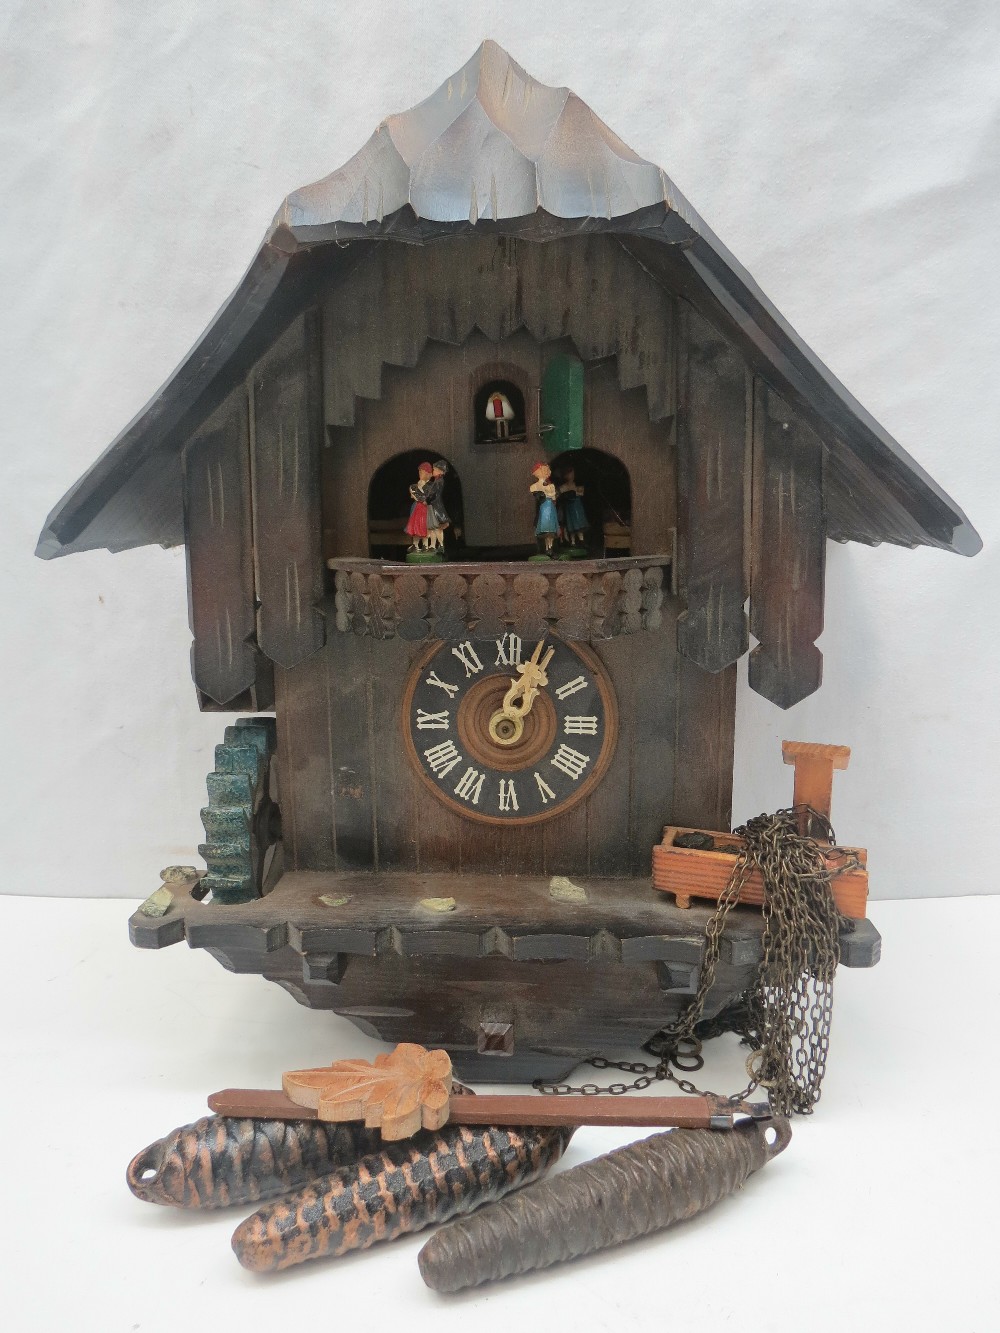 A Post-war, West German made, cuckoo clock, with dancing couples below the cuckoo movement and water